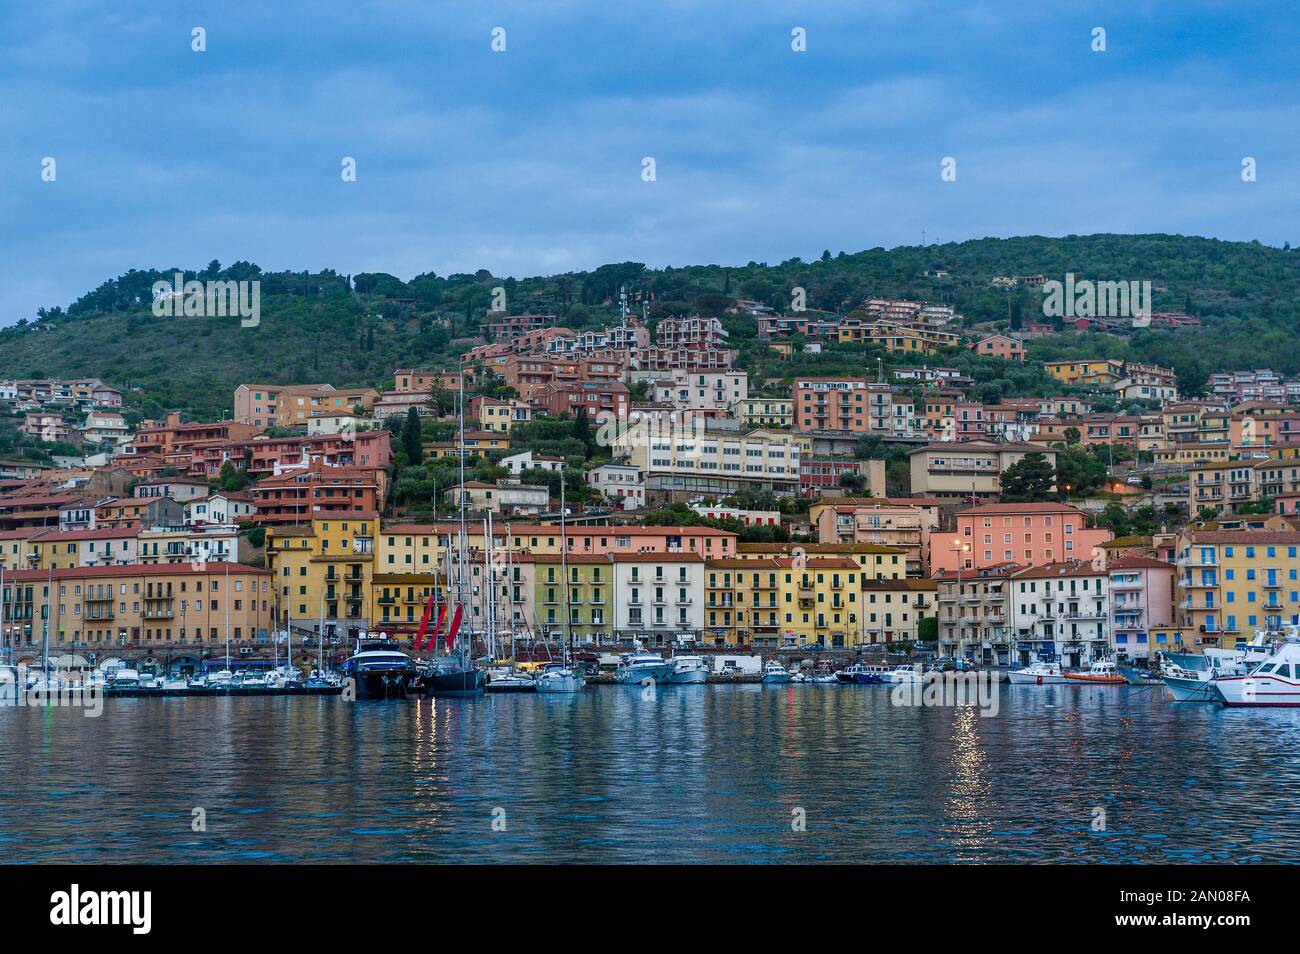 Porto Santo Stefano old town view from the water at early norning light. Toscana, Italy Stock Photo